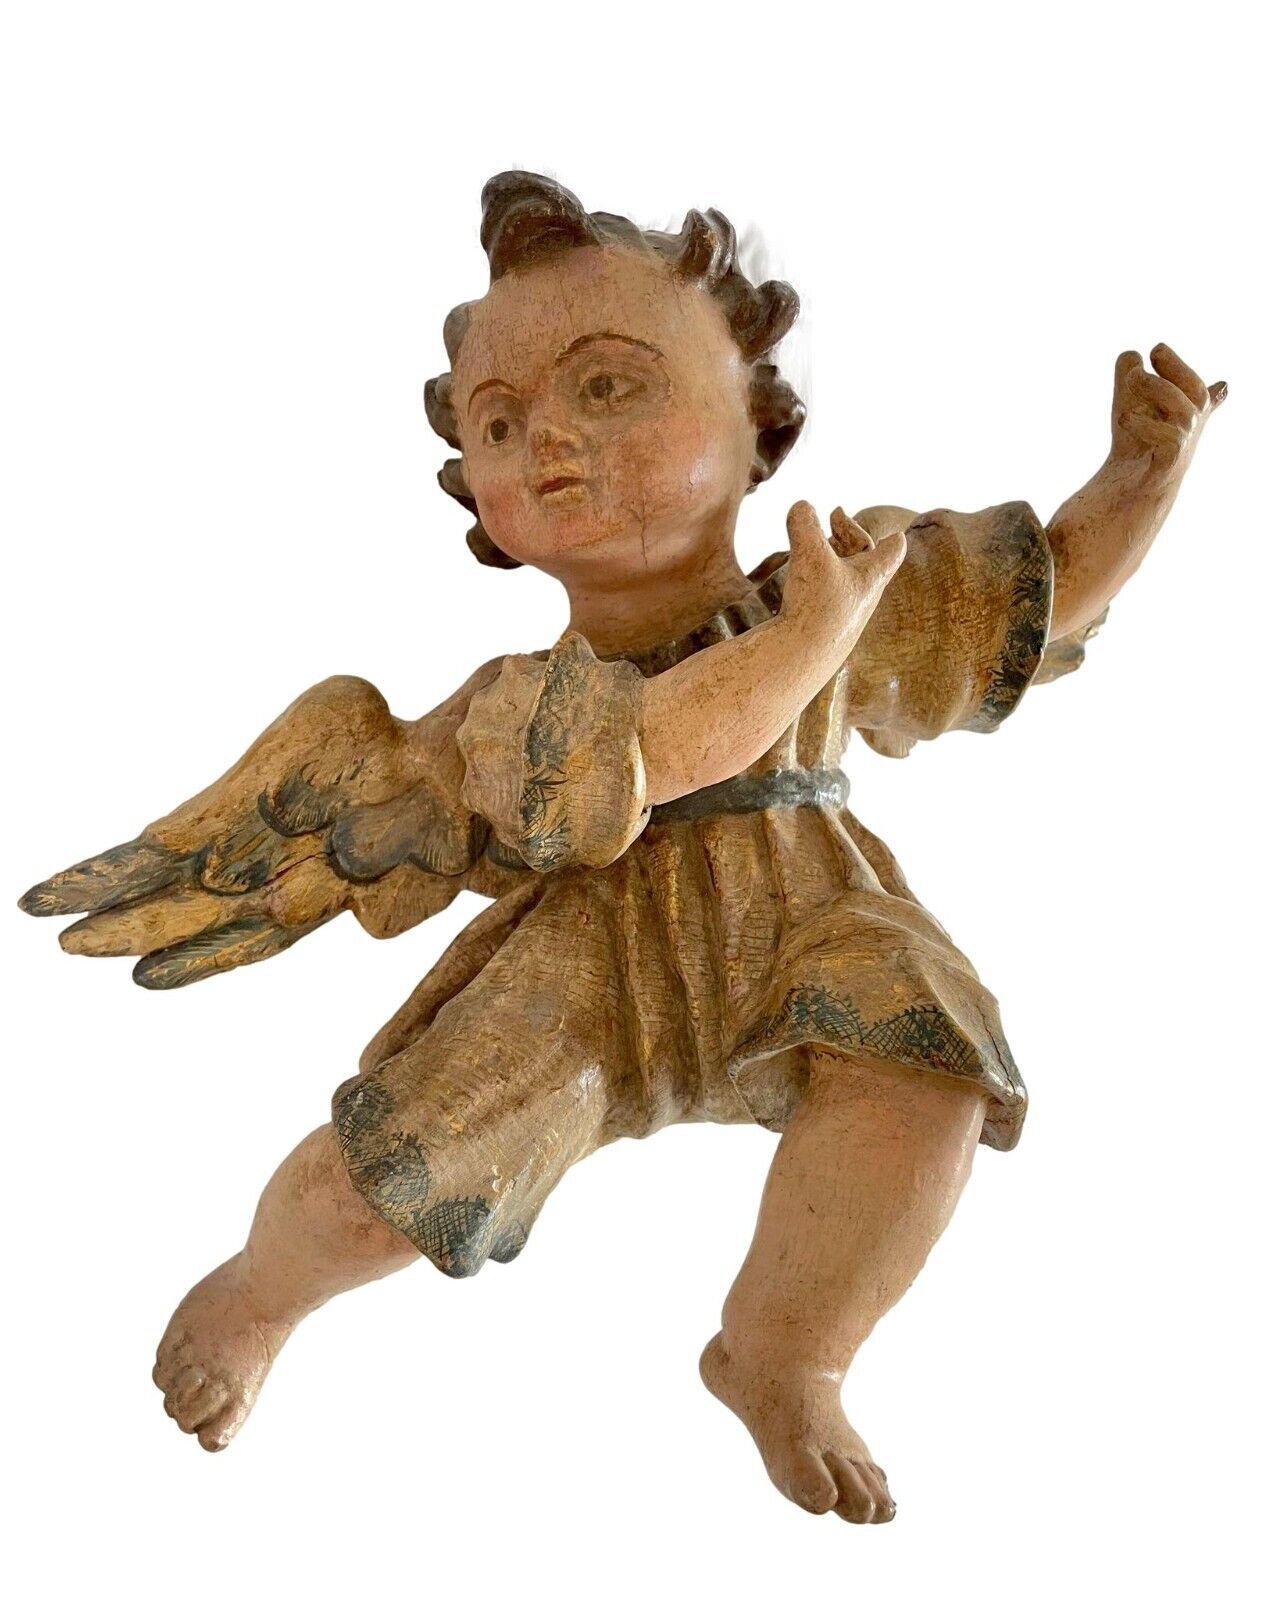 ANGEL. CARVED, POLYCHROME AND GOLDEN WOOD. SPAIN. 17TH-18TH CENTURY